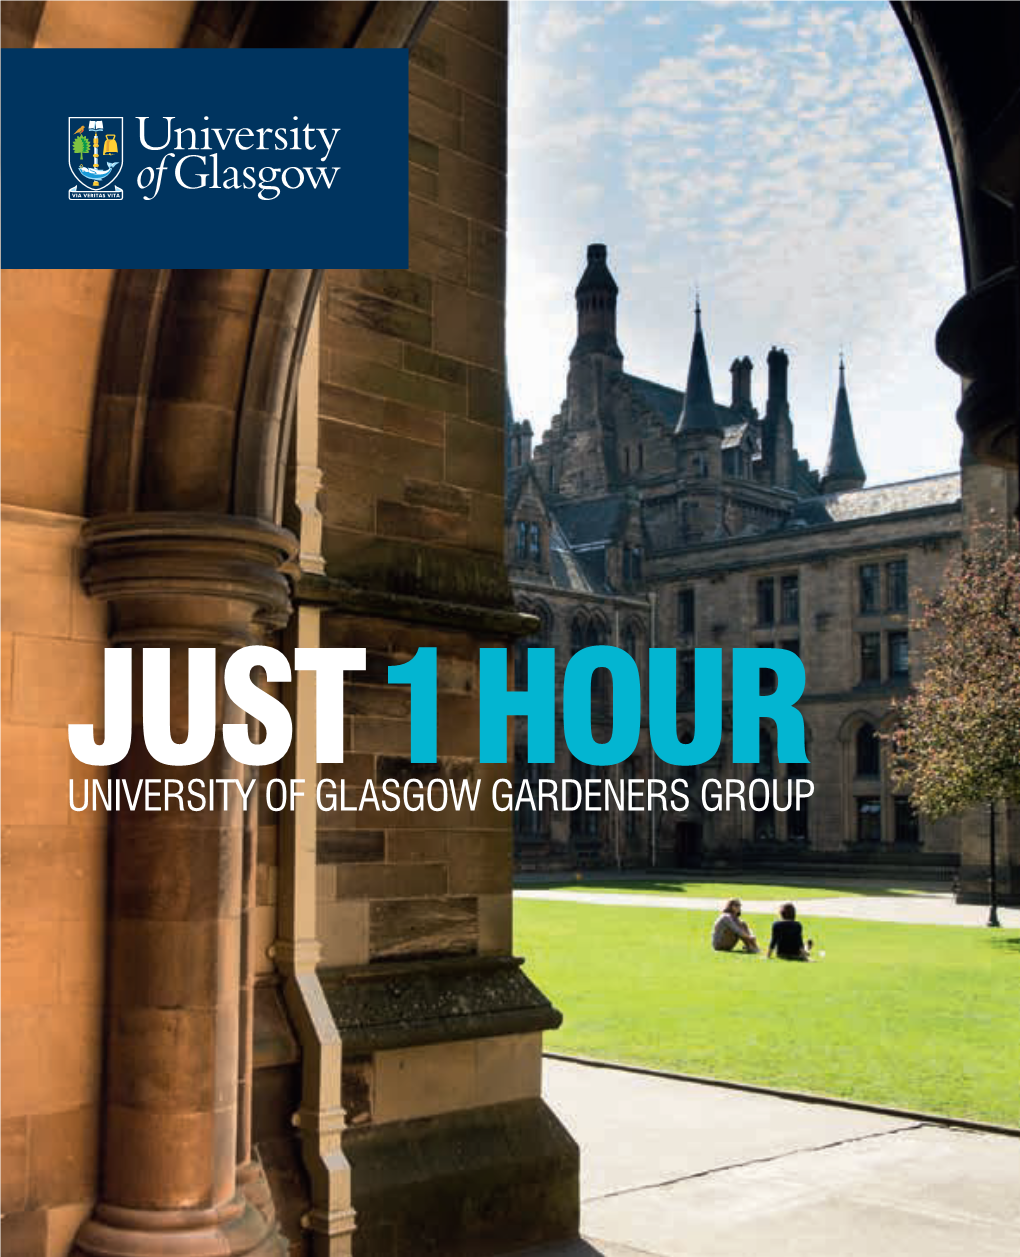 JUST 1 HOUR UNIVERSITY of GLASGOW GARDENERS GROUP JUST 1 HOUR Welcome to Our Guide, JUST 1 HOUR